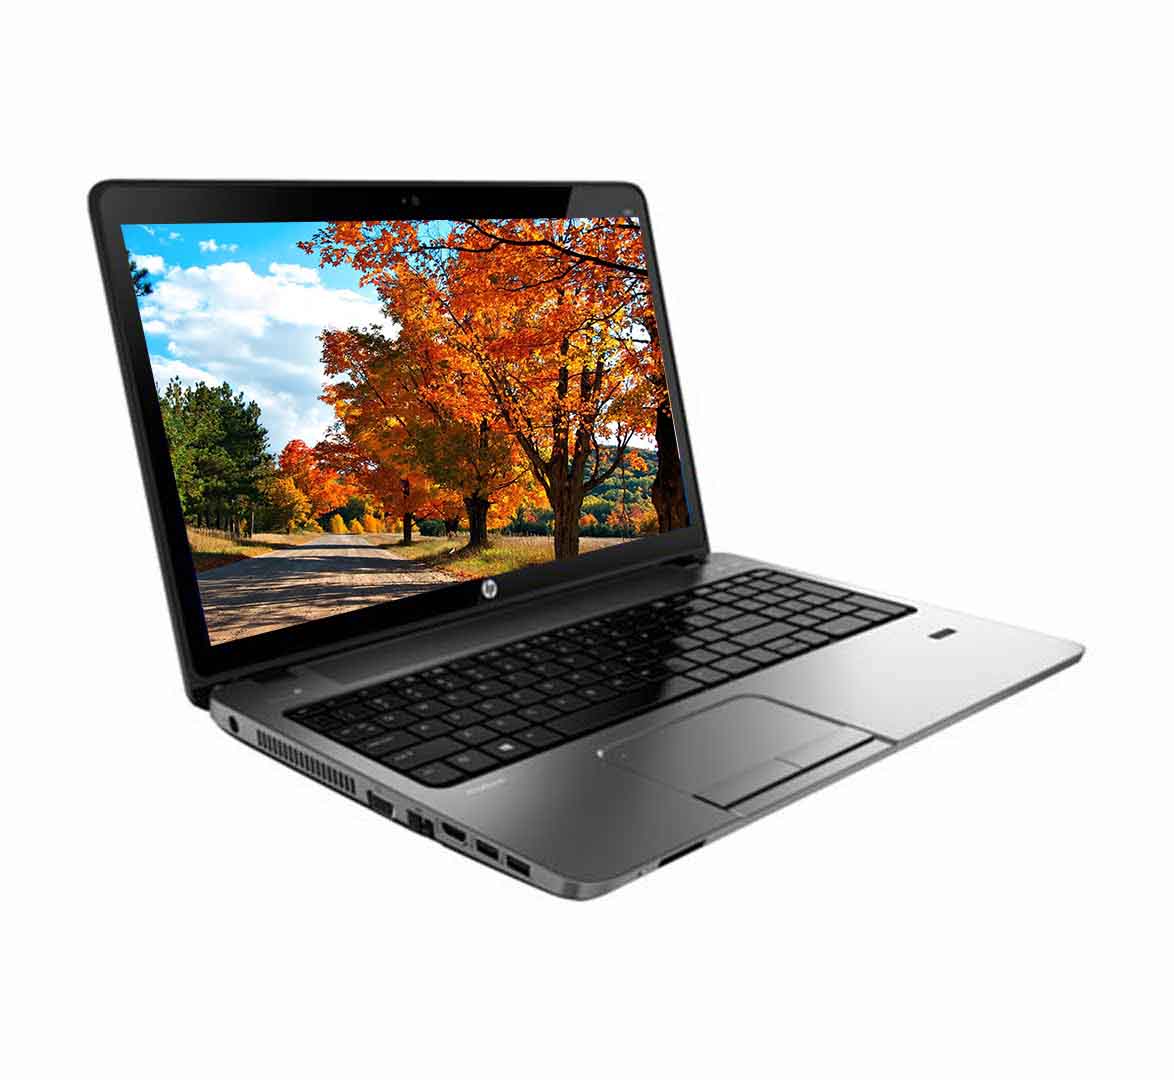 In Stock HP ProBook 450 Laptop for Business